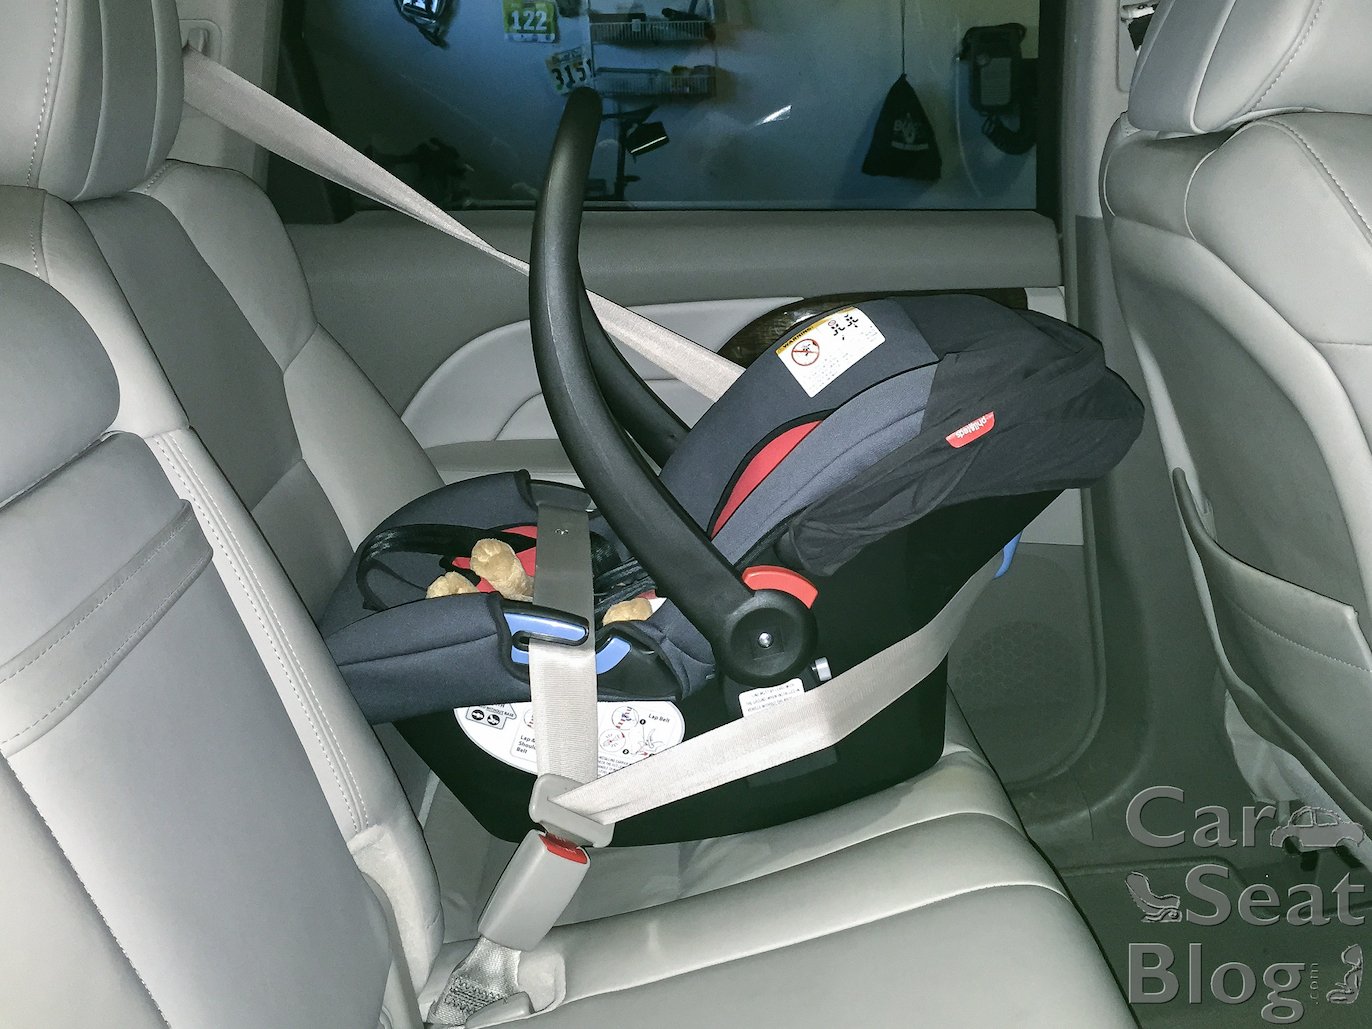 Nuna Pipa Car Seat Without Base - How To Install Infant Car Seat With Belt Without Base